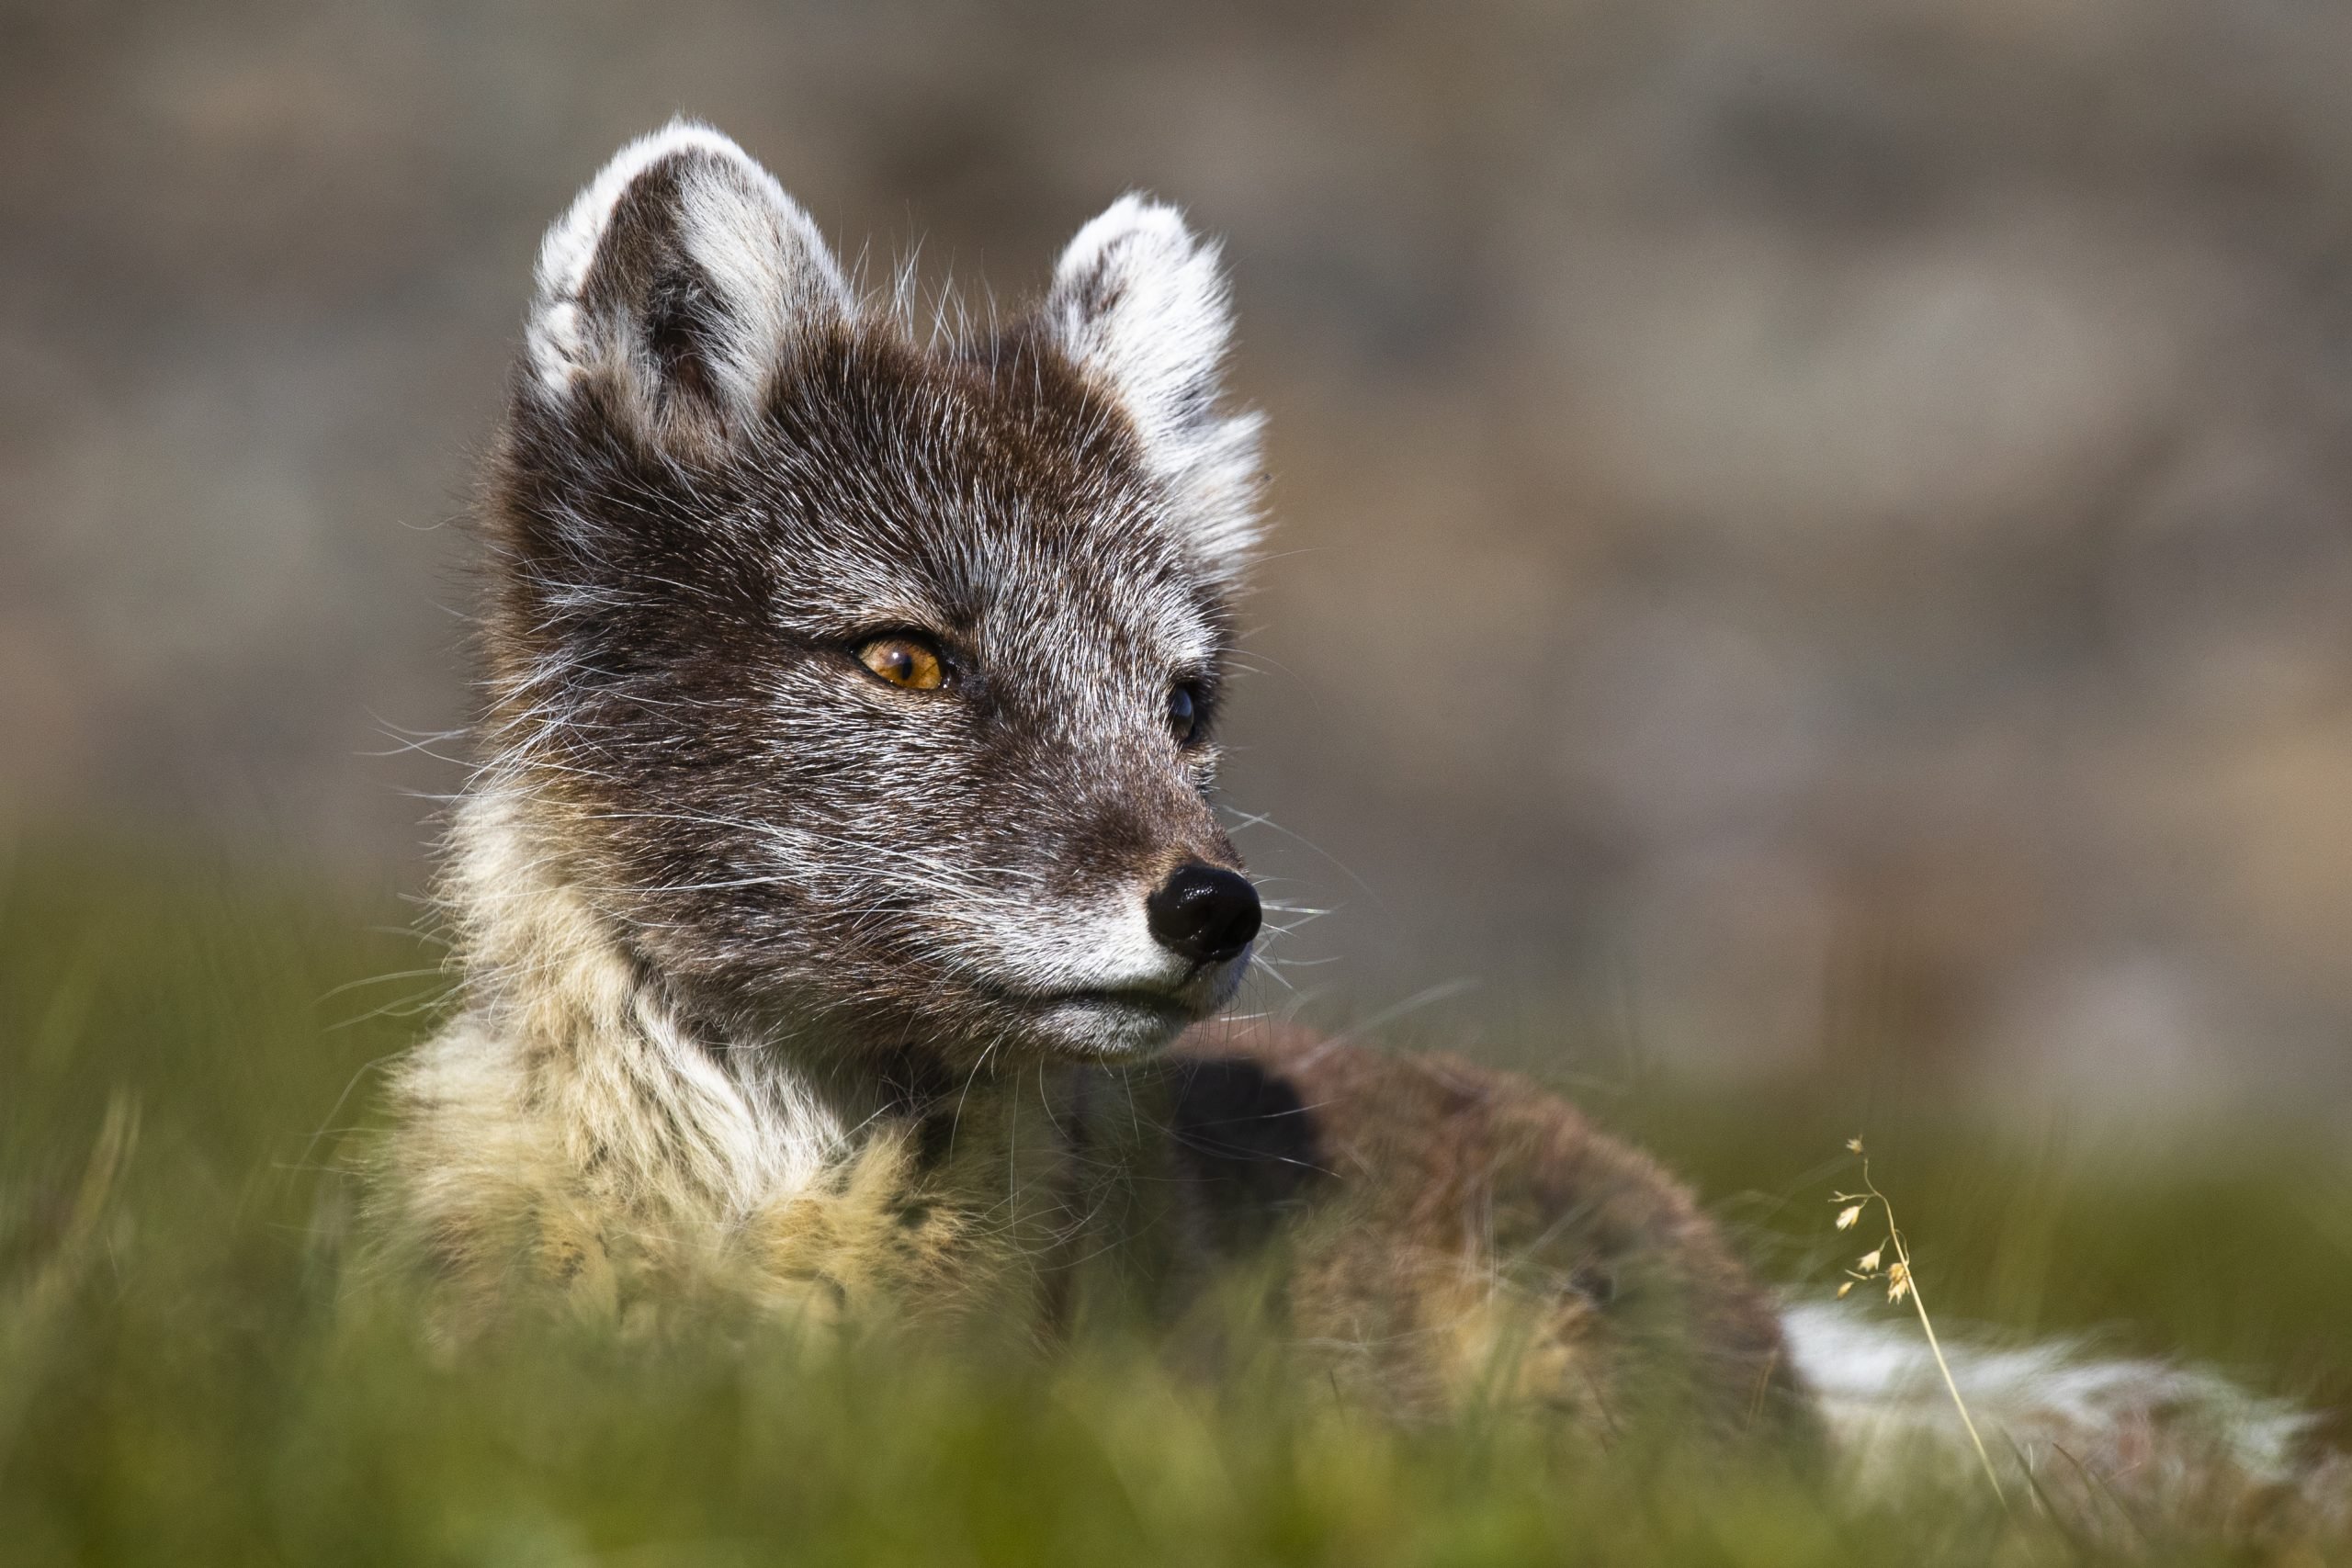 Join us discovering the wildlife in Svalbard